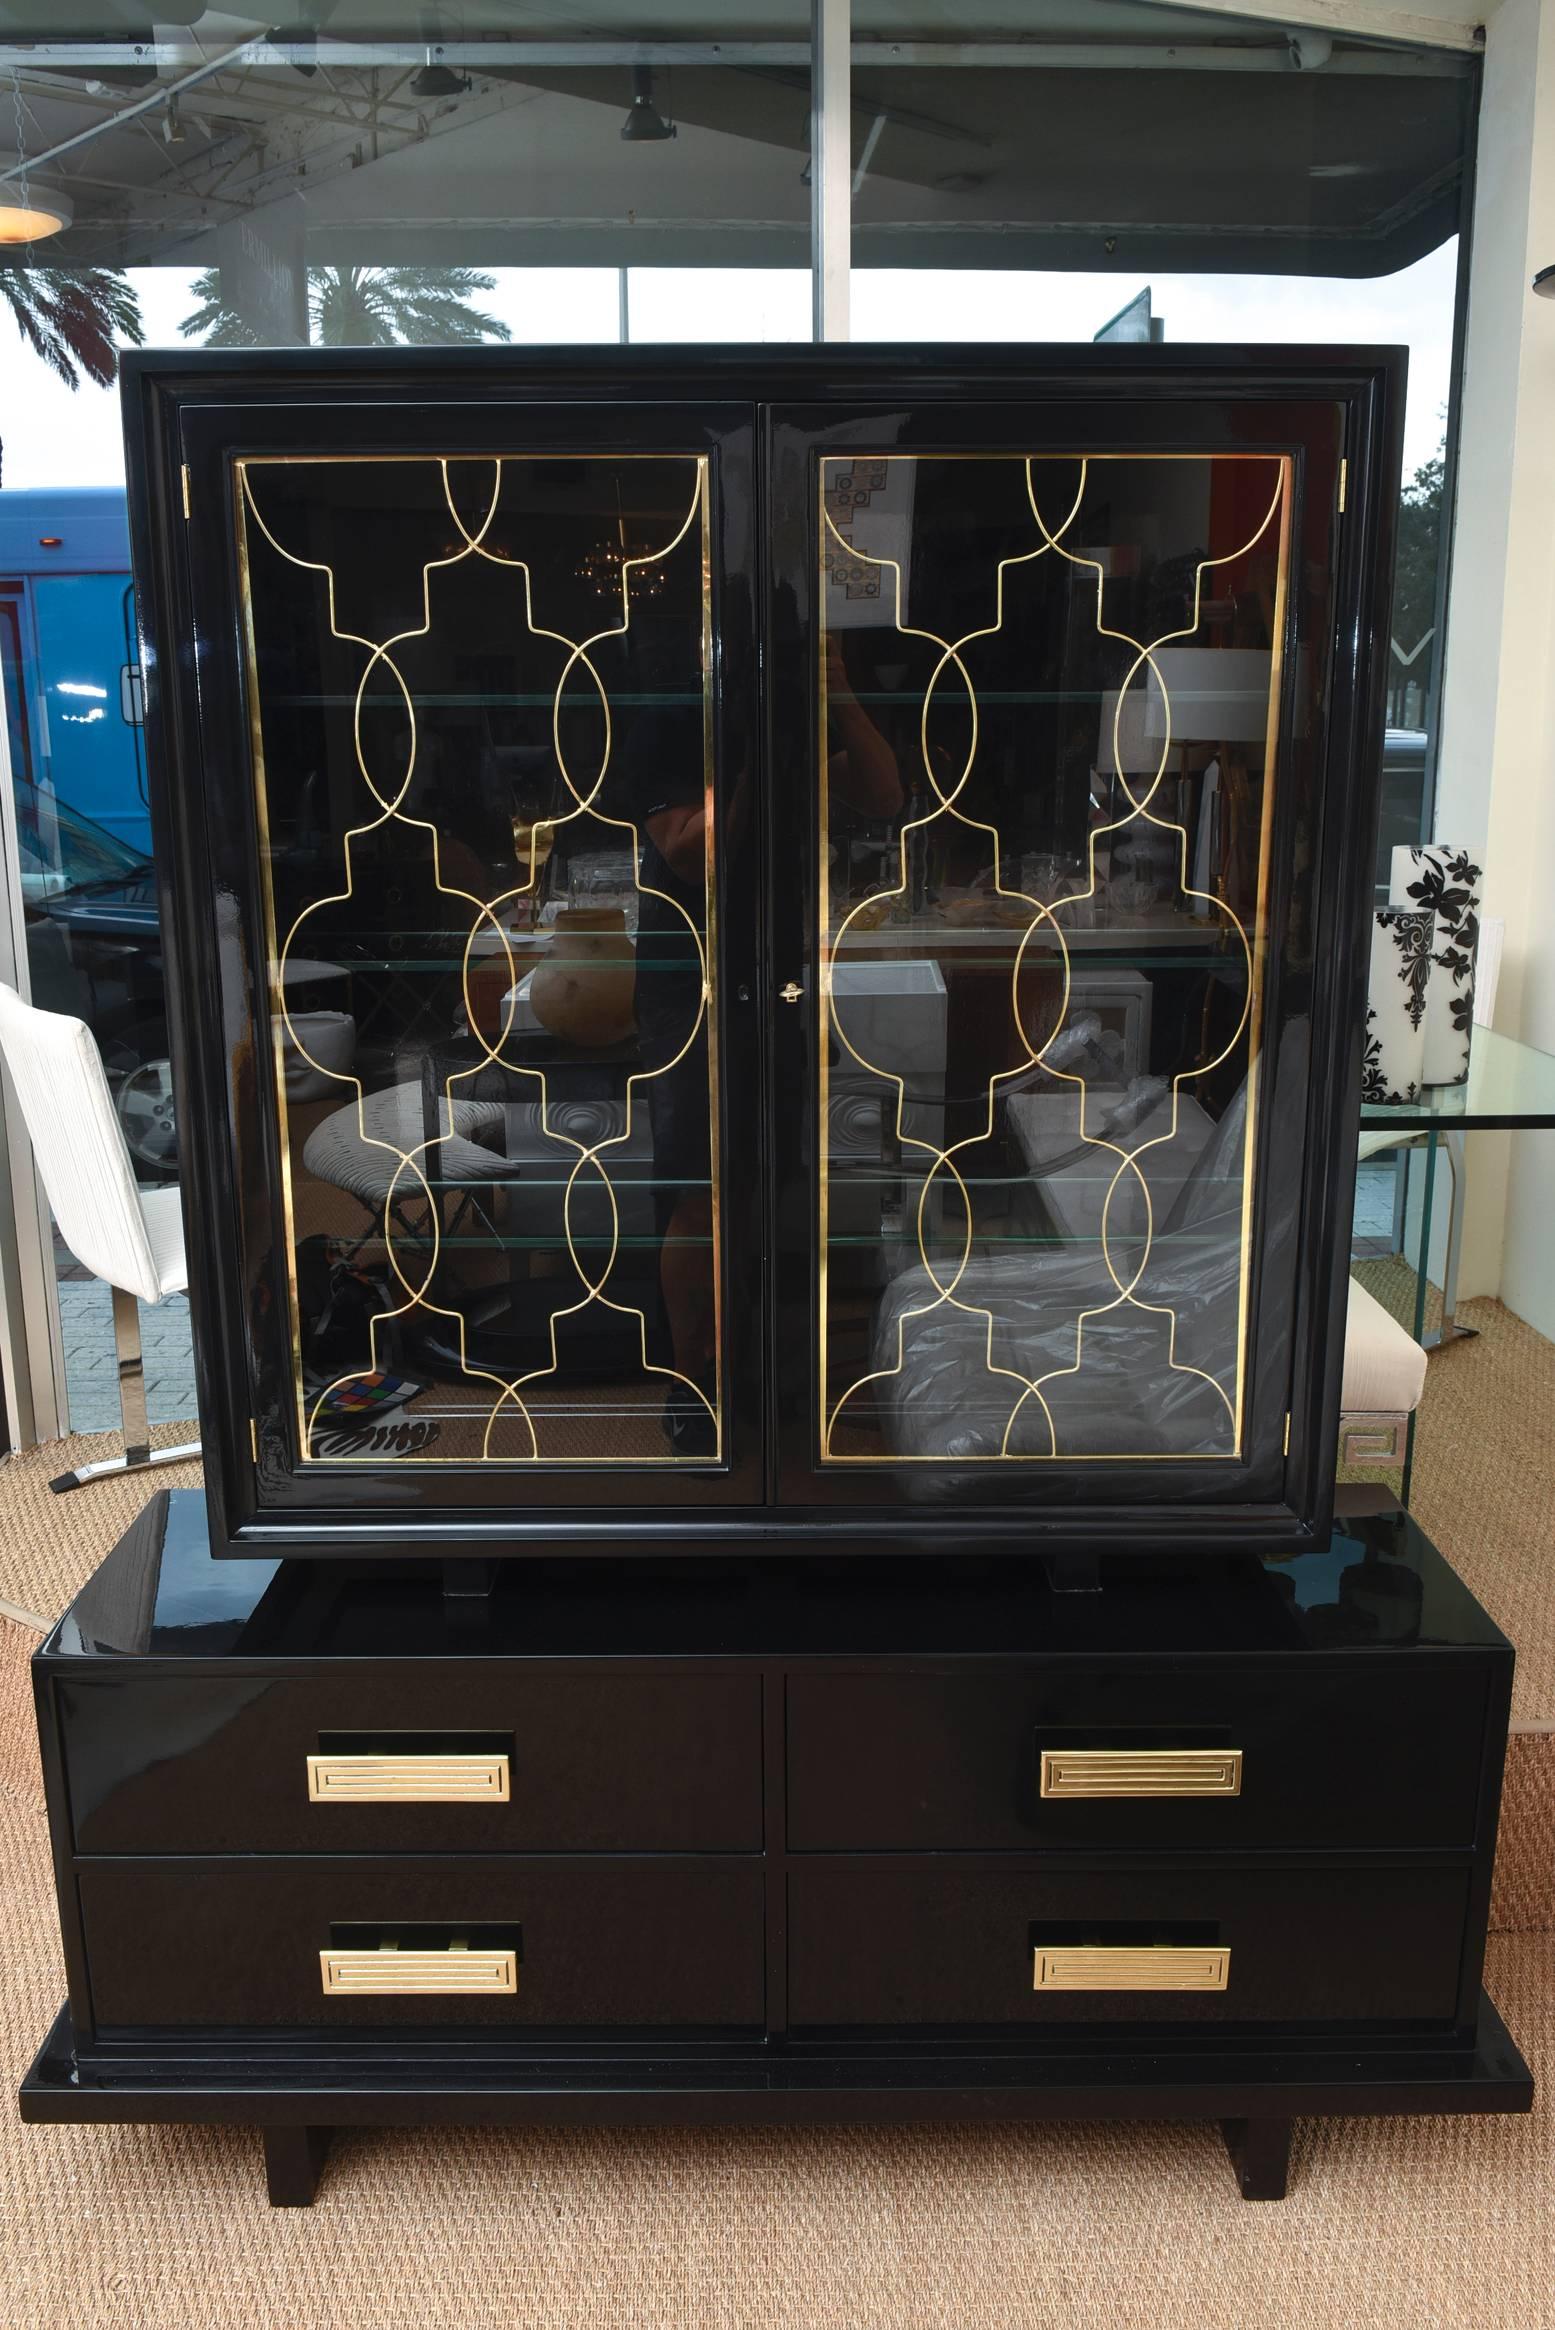 This amazing and rare restored and two part cabinet, buffet, console is beautiful. It is by Grosfeld House and rarely seen. It is from the 1940s and is Hollywood Regency yet modern and remains so very elegant. All of the brass hardware is original